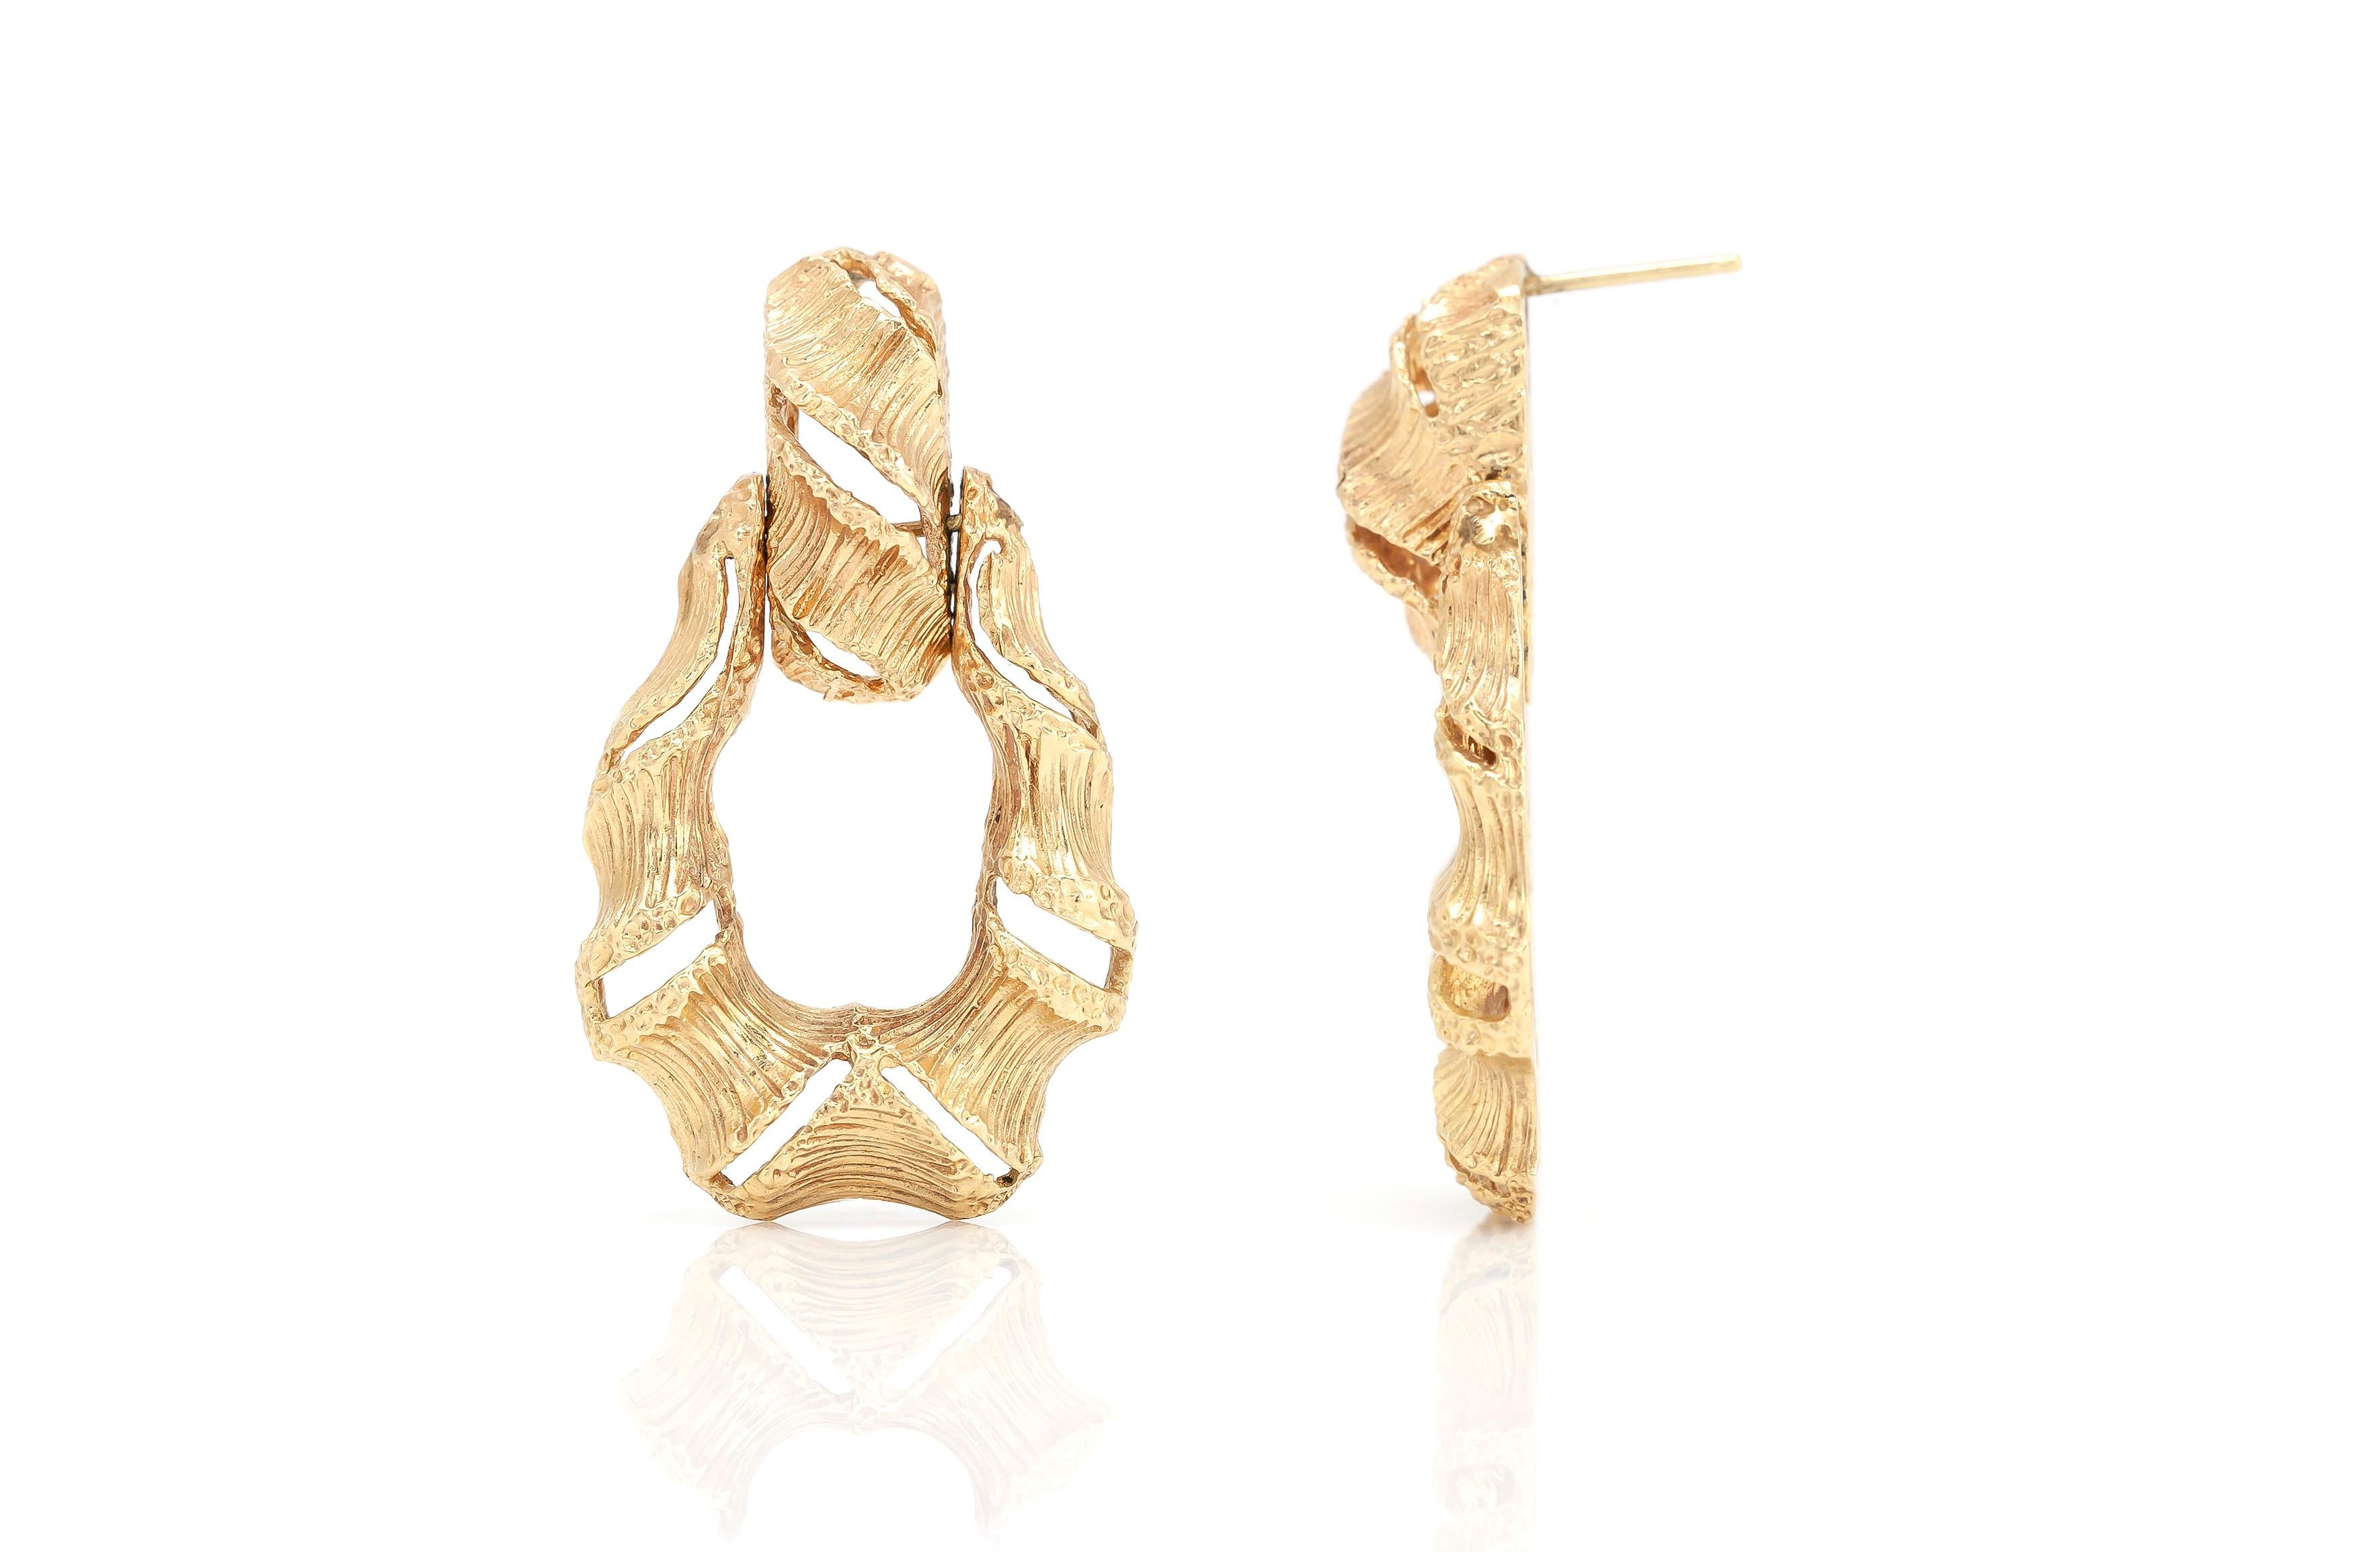 The earrings is finely crafted in 14k yellow gold and weighing total of 12.2 dwt.